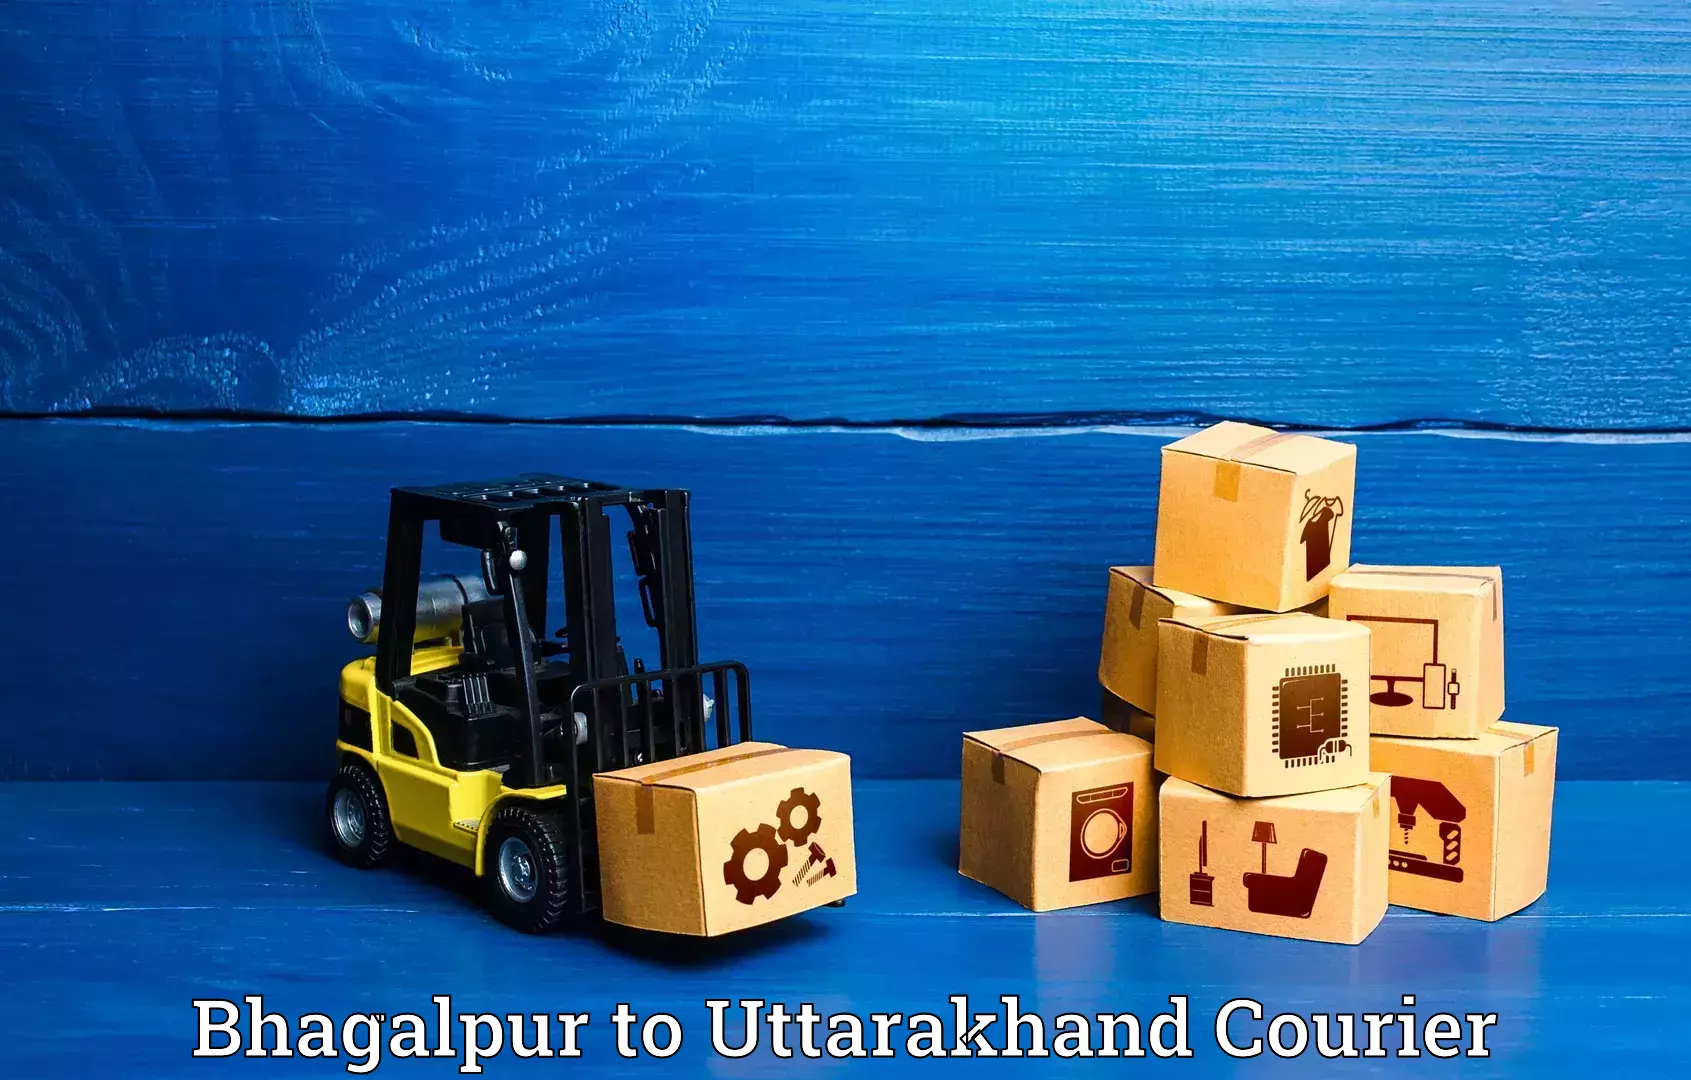 Baggage relocation service in Bhagalpur to Mussoorie